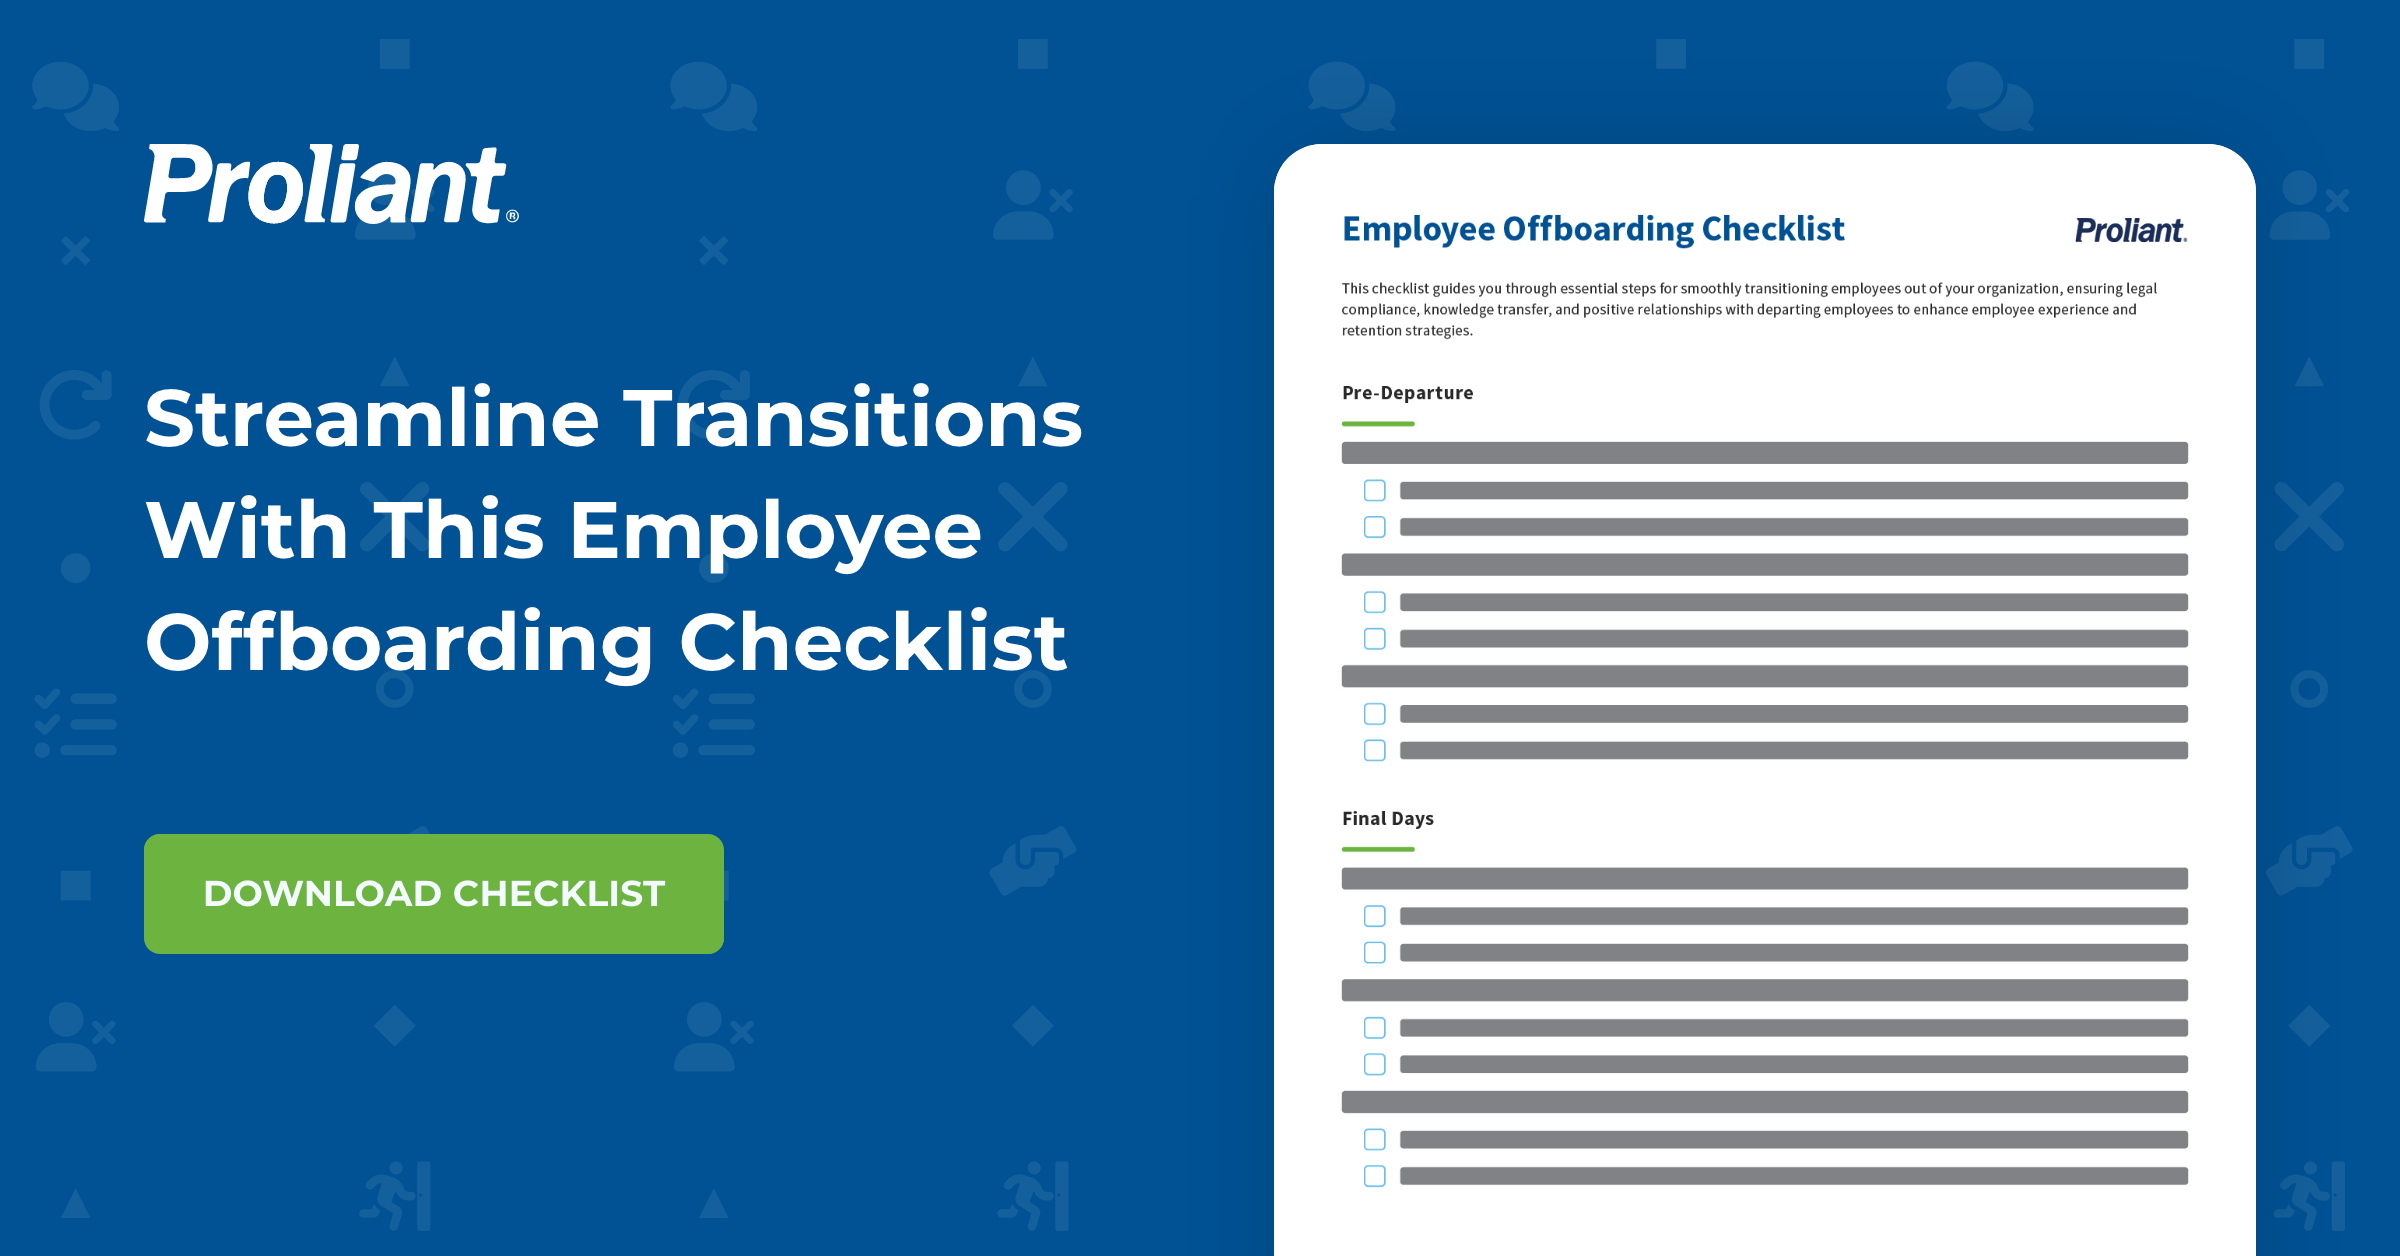 Employee Offboarding Checklist - Feature Image